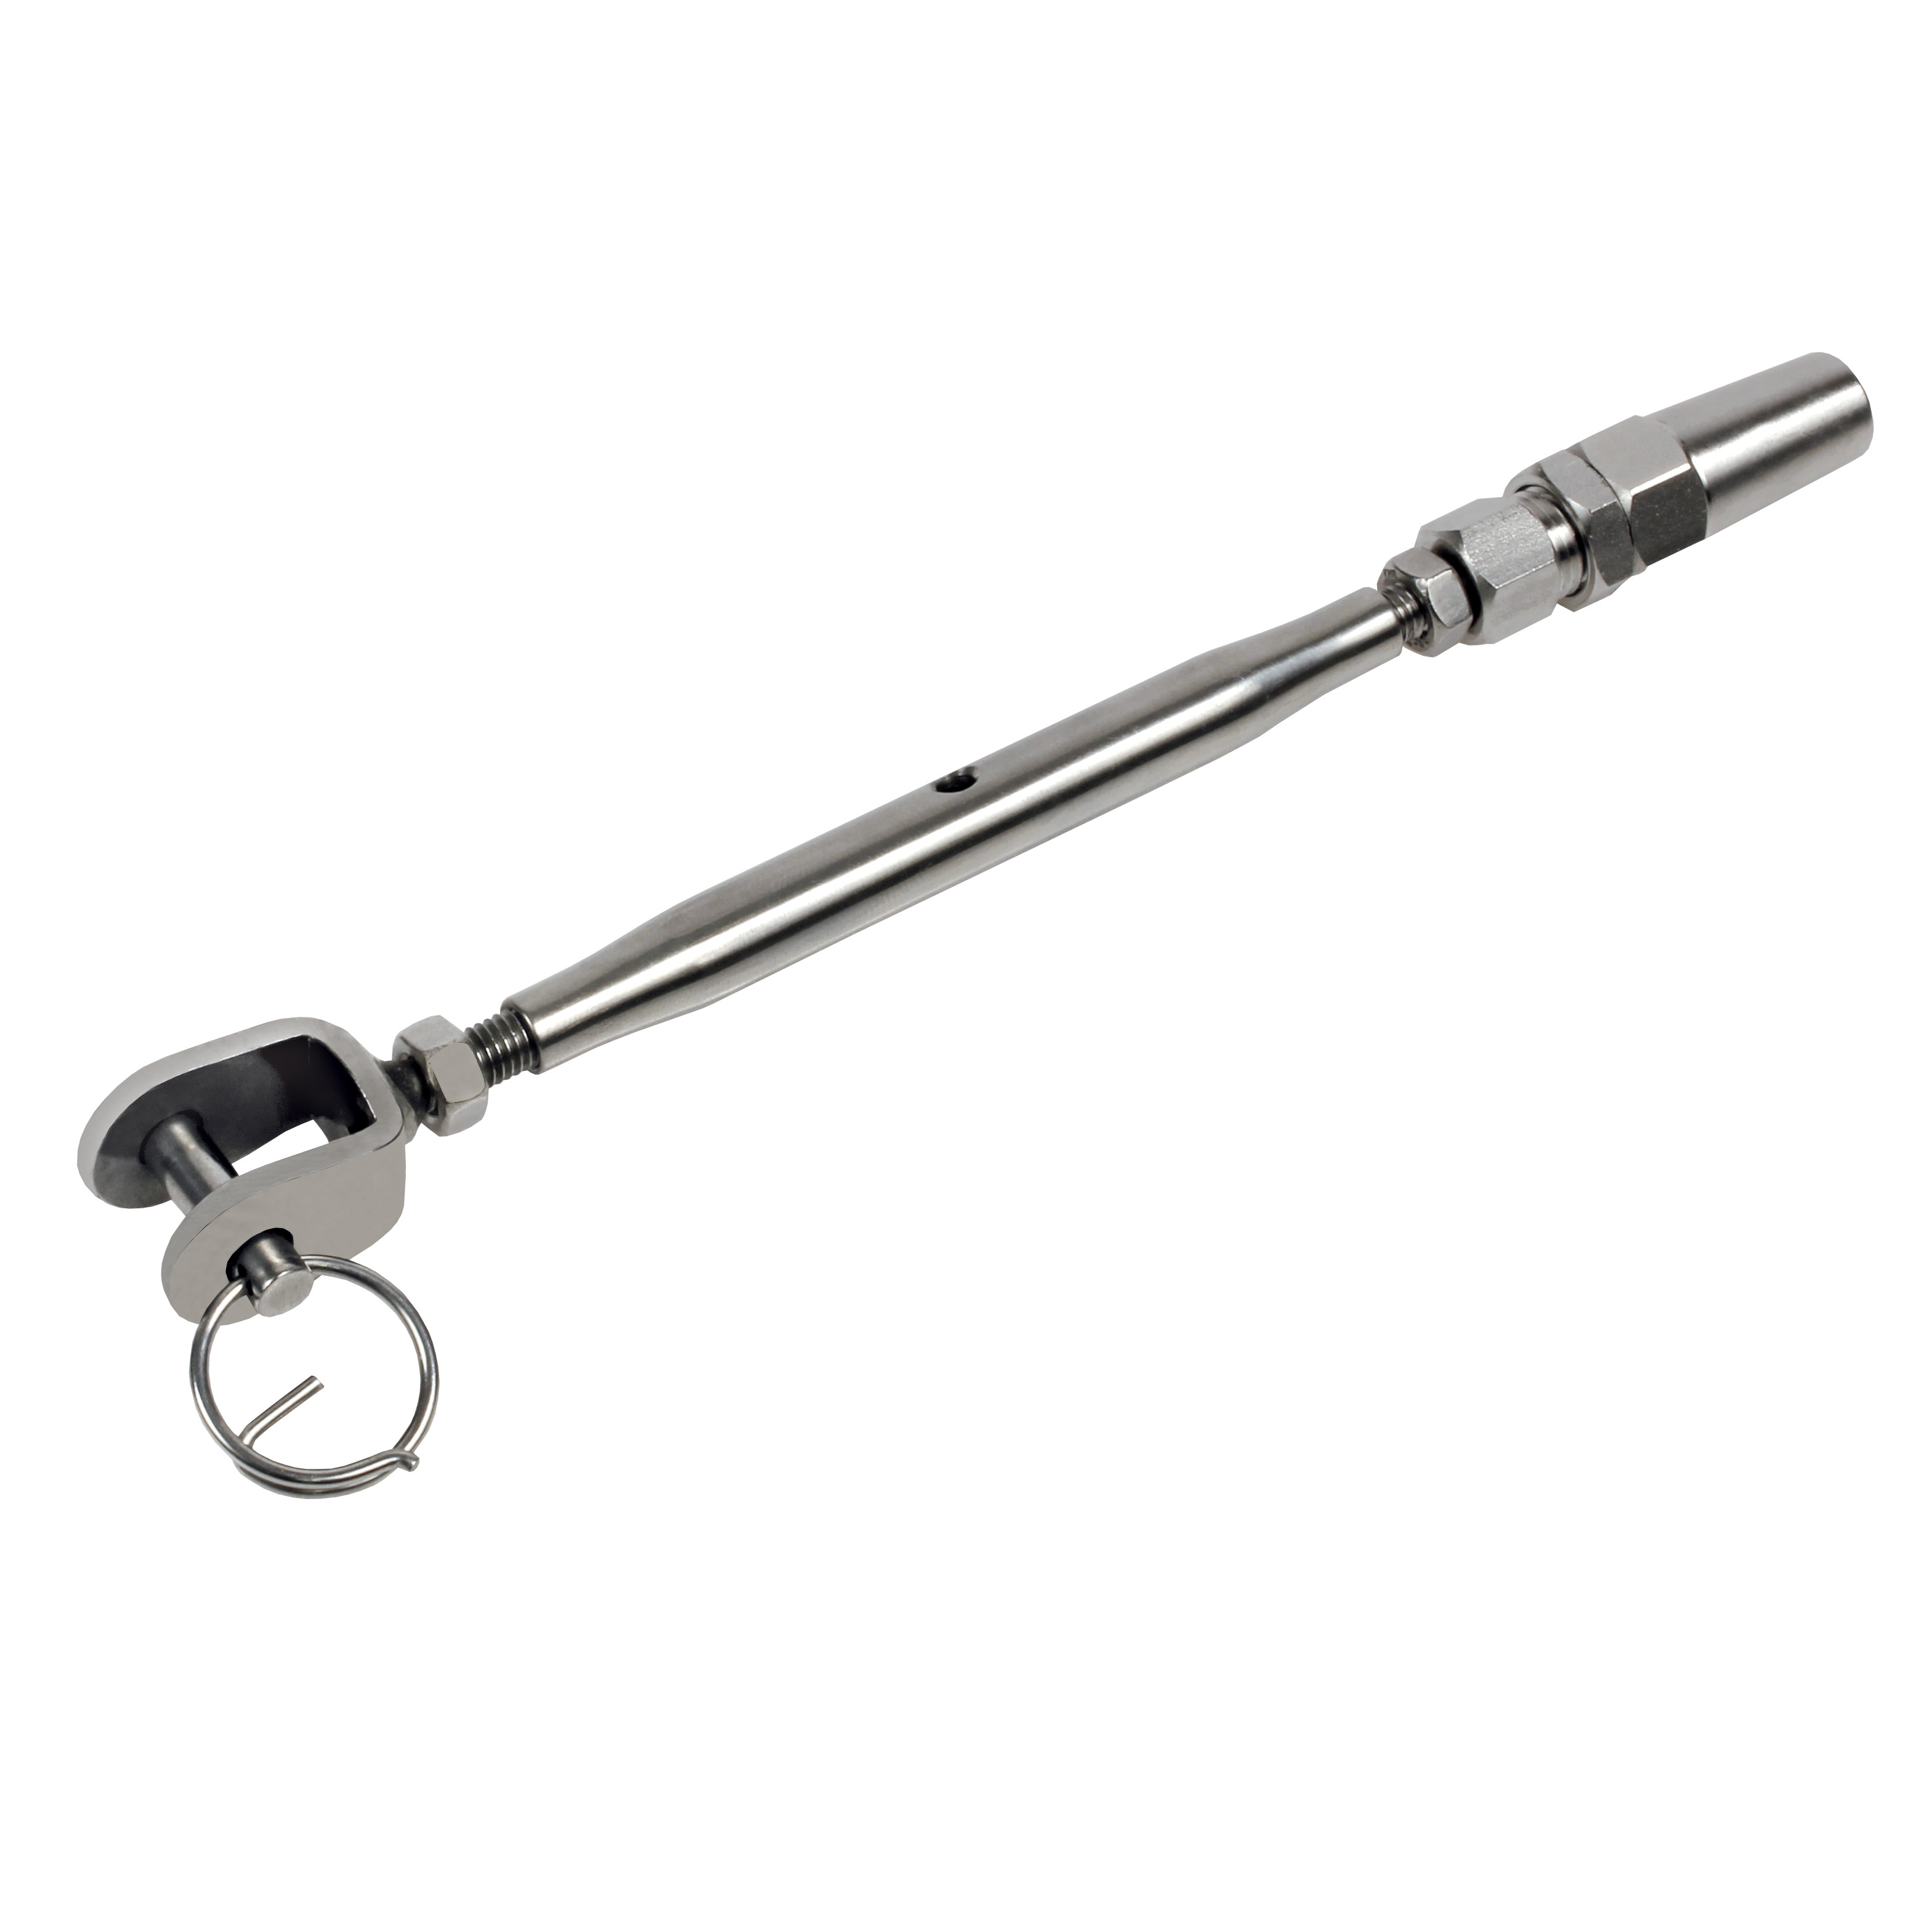 Stainless steel manual rigging screw - Stainless steel - manual - with 1 welded clevis and 1 manually tightened end - from 5 to 12mm